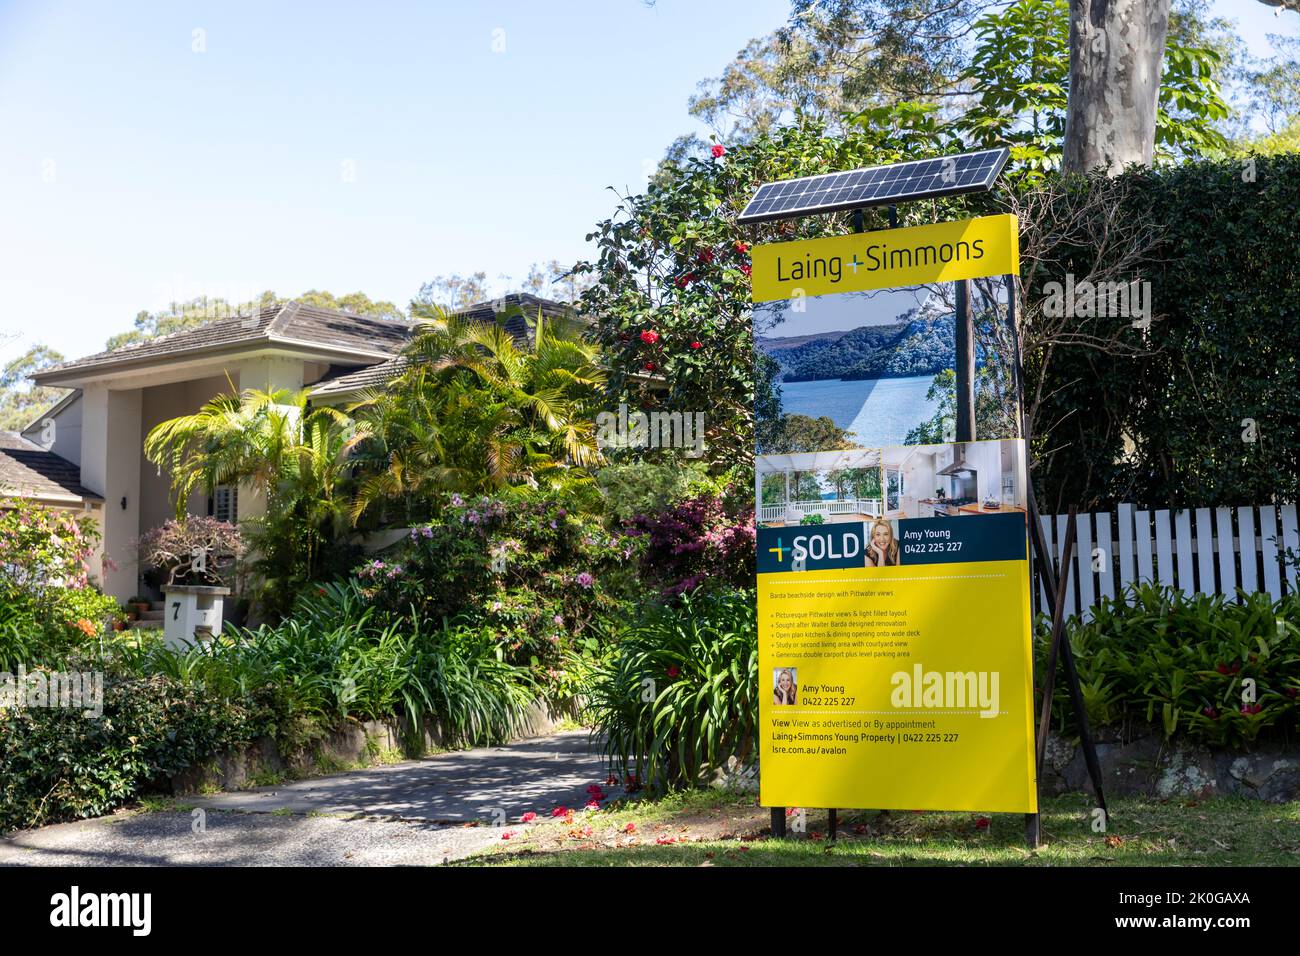 Australian home sold, house in Avalon Beach with marketing board showing property sold,Sydney,NSW,Australia Stock Photo